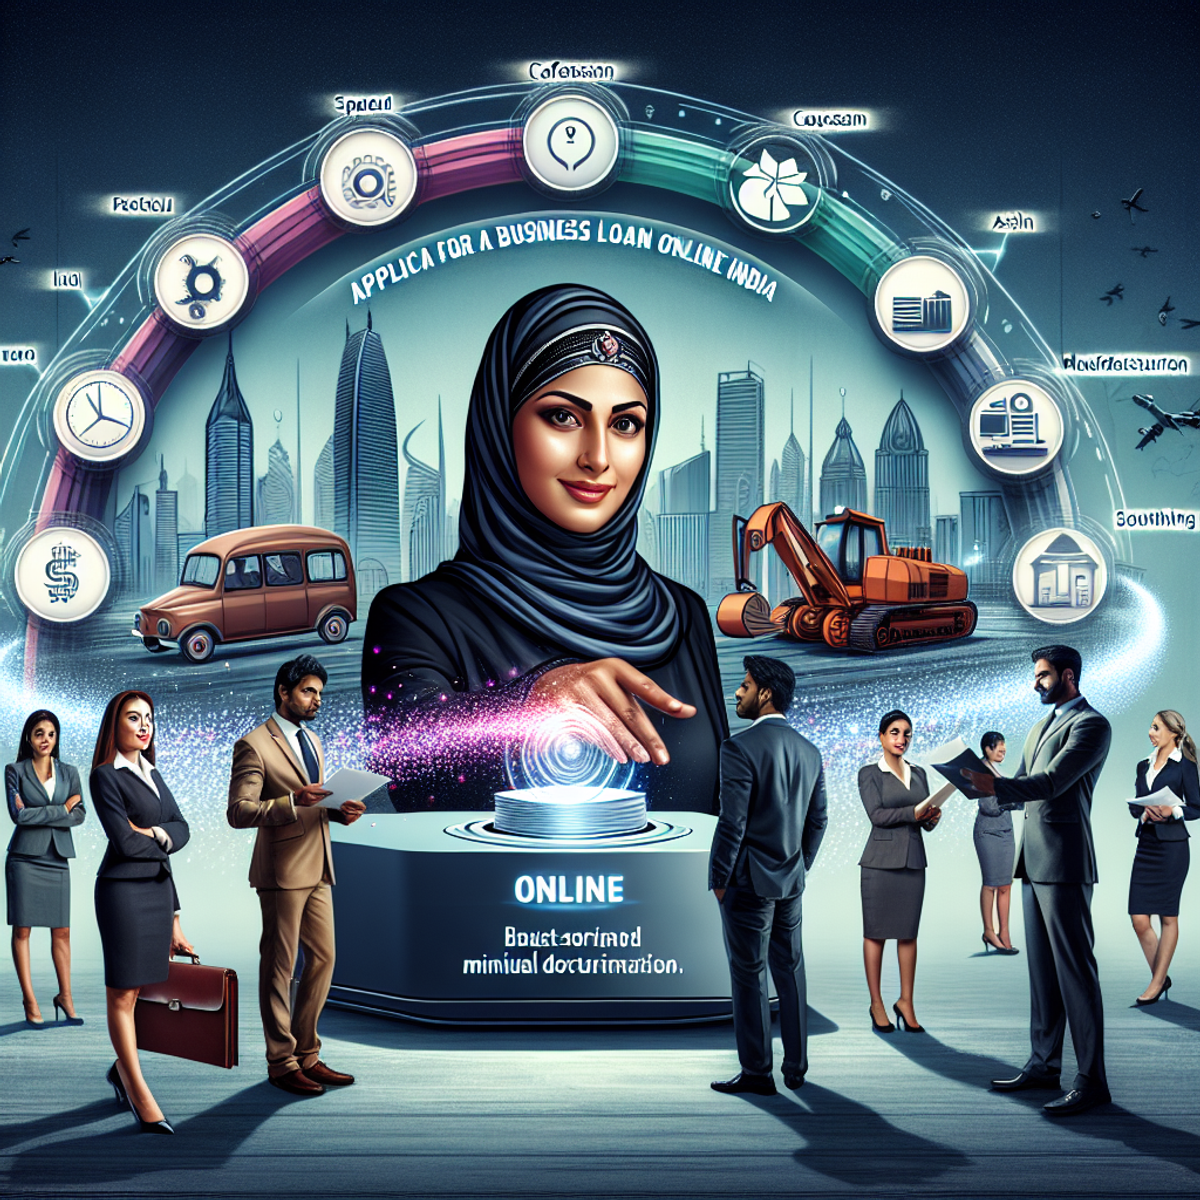 A Middle-Eastern woman using a futuristic device to apply for a business loan online, with spheres of light representing customized offers reaching a diverse group of people.